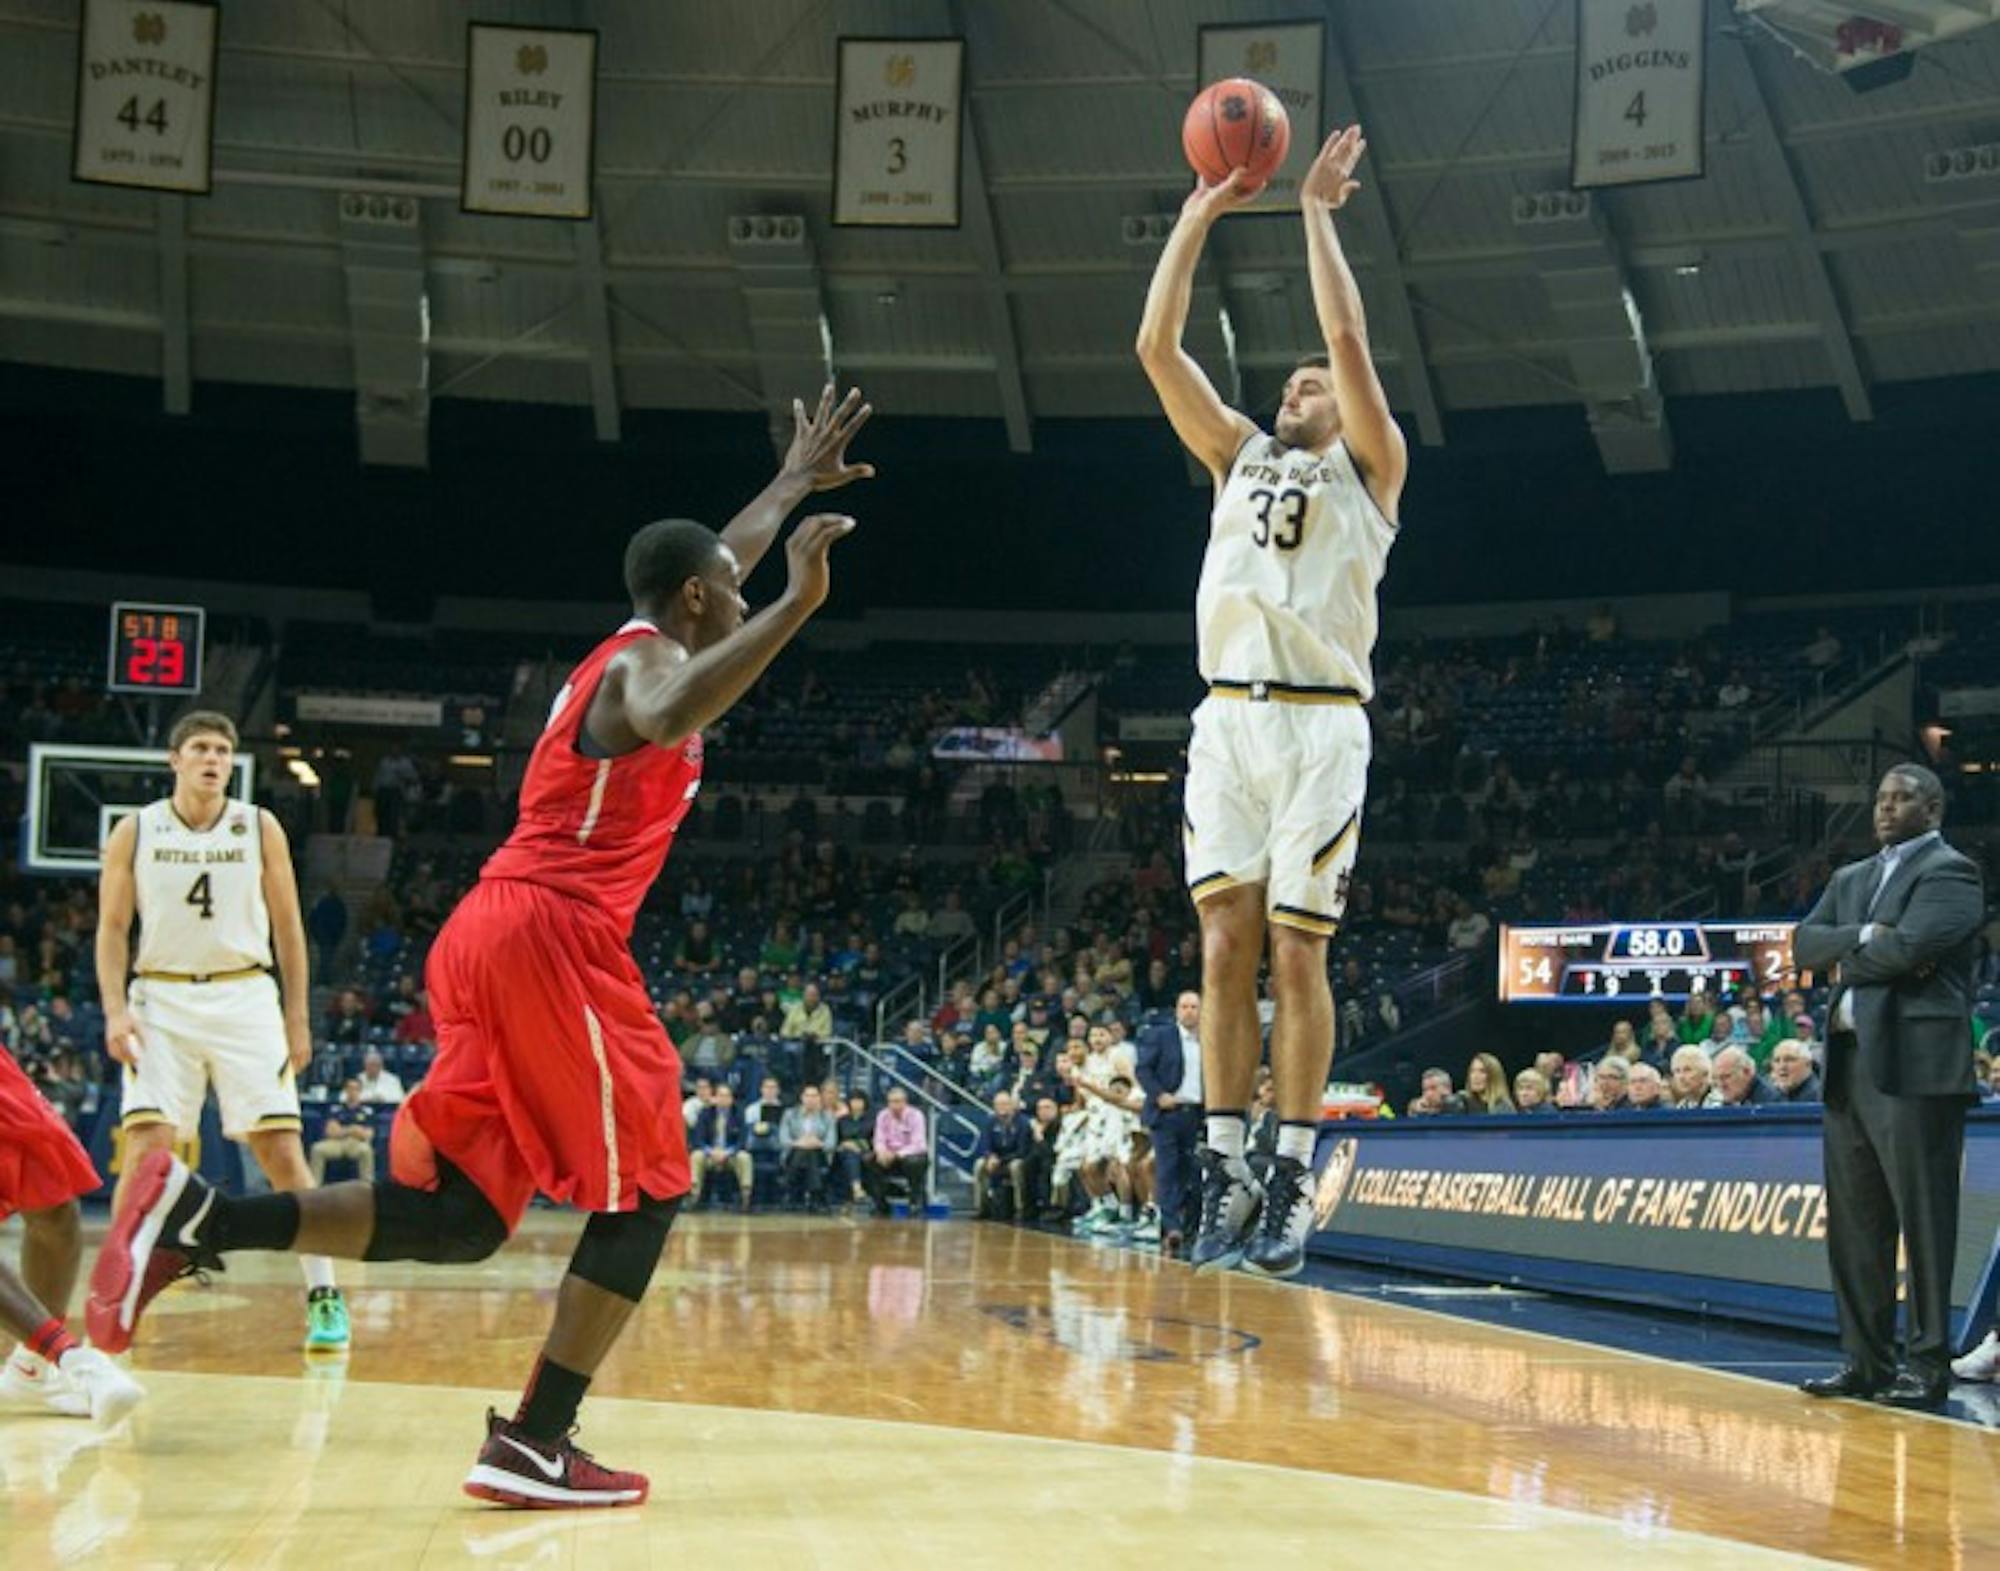 Irish freshman forward John Mooney shoots a three-pointer over the defender during a game against Seattle on Nov. 16.